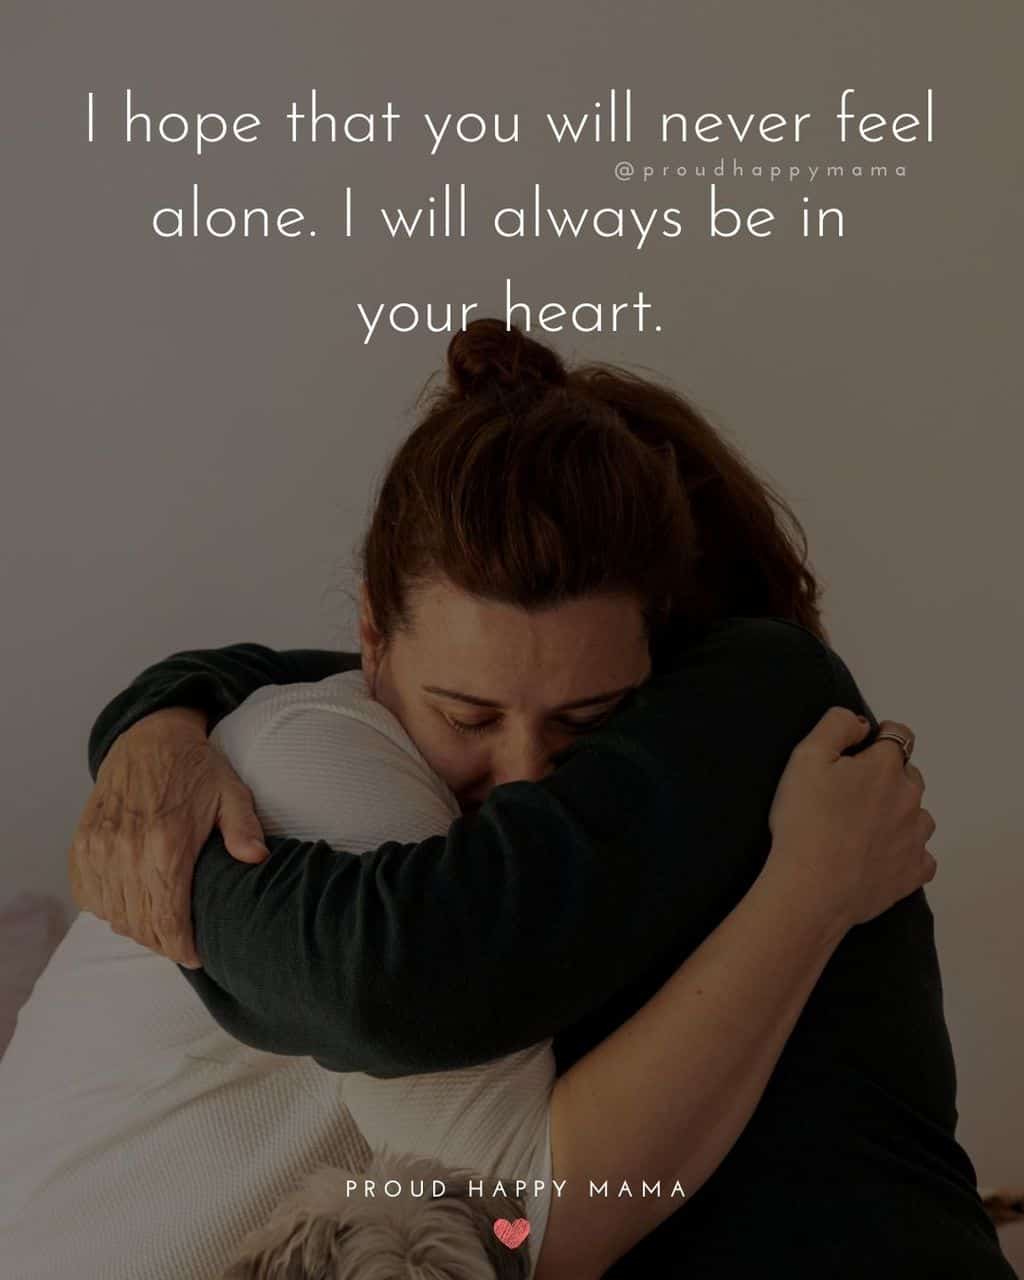 Niece Quotes - I hope that you will never feel alone. I will always be in your heart.